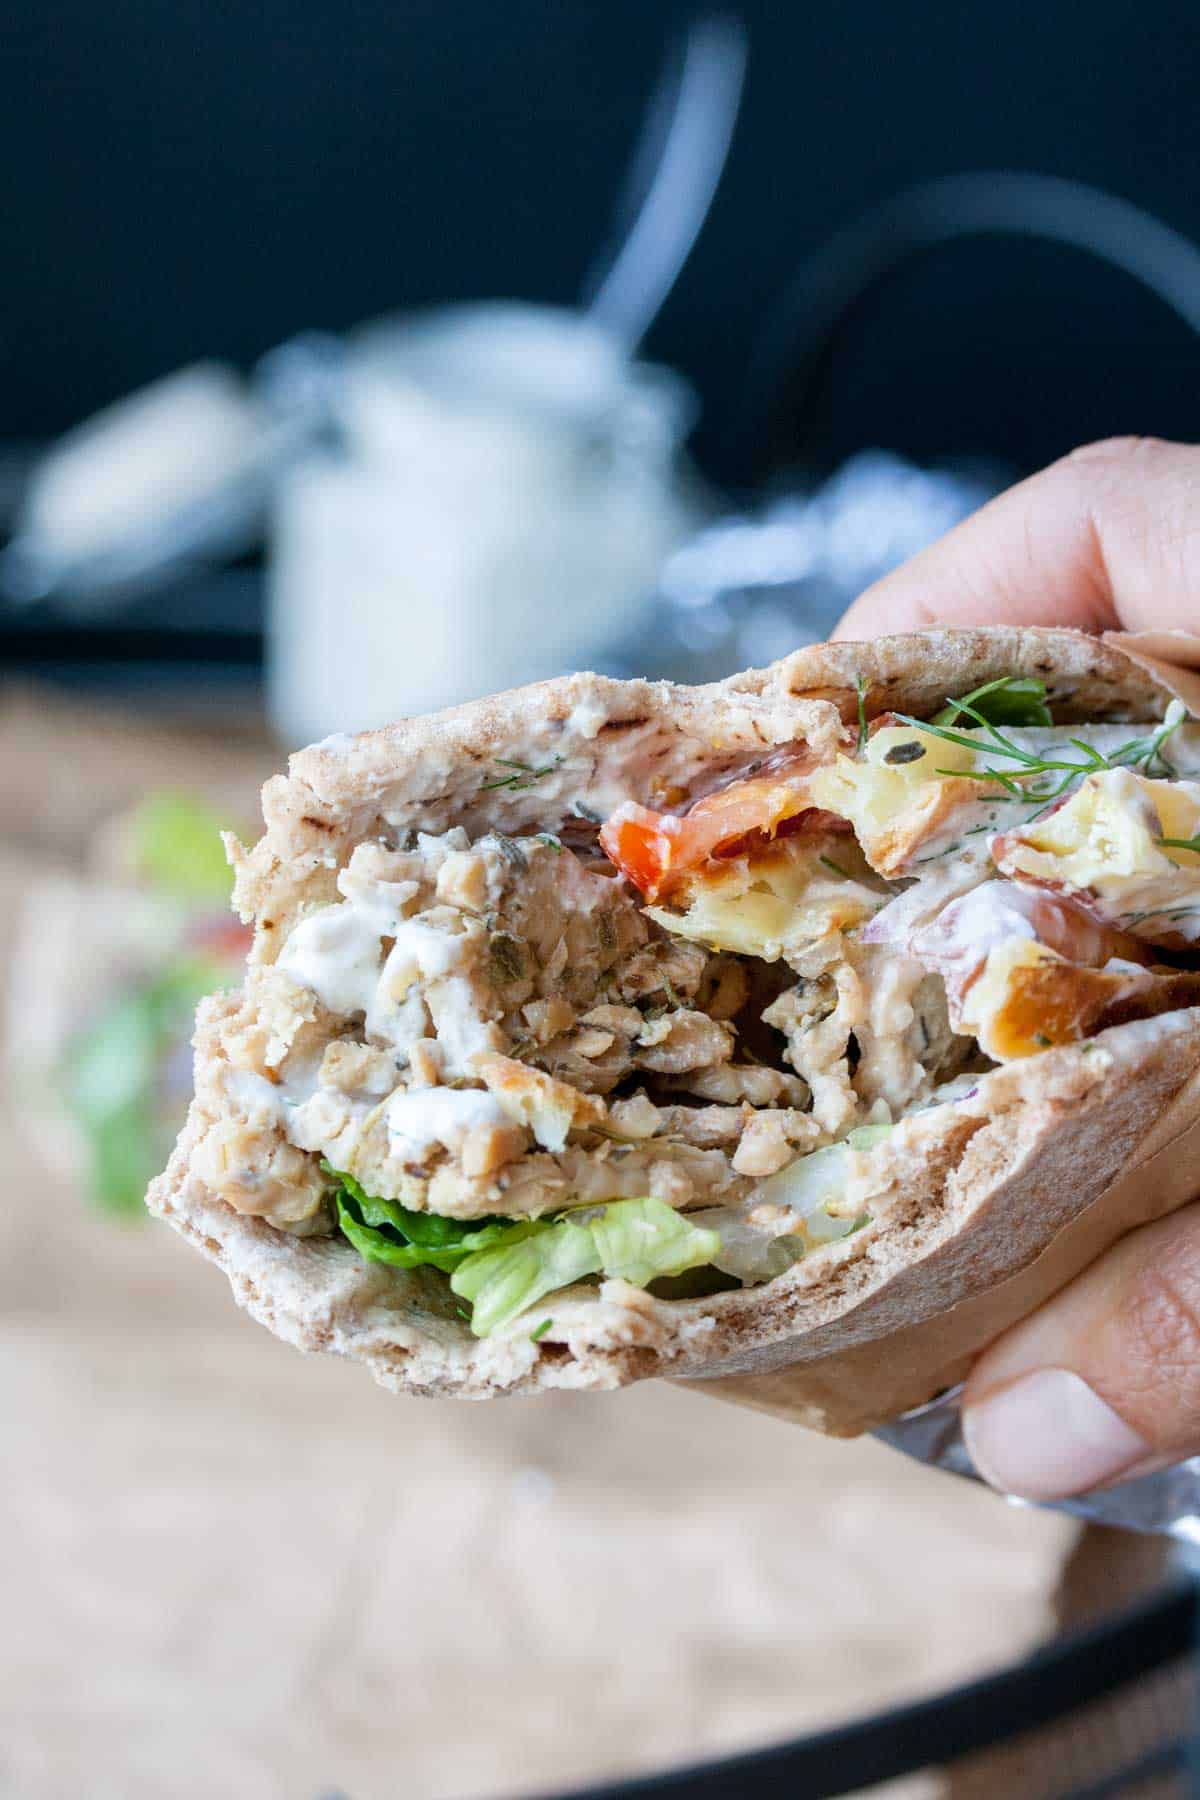 A hand holding a gryo wrap filled with tempeh and veggies and a bite out of it.